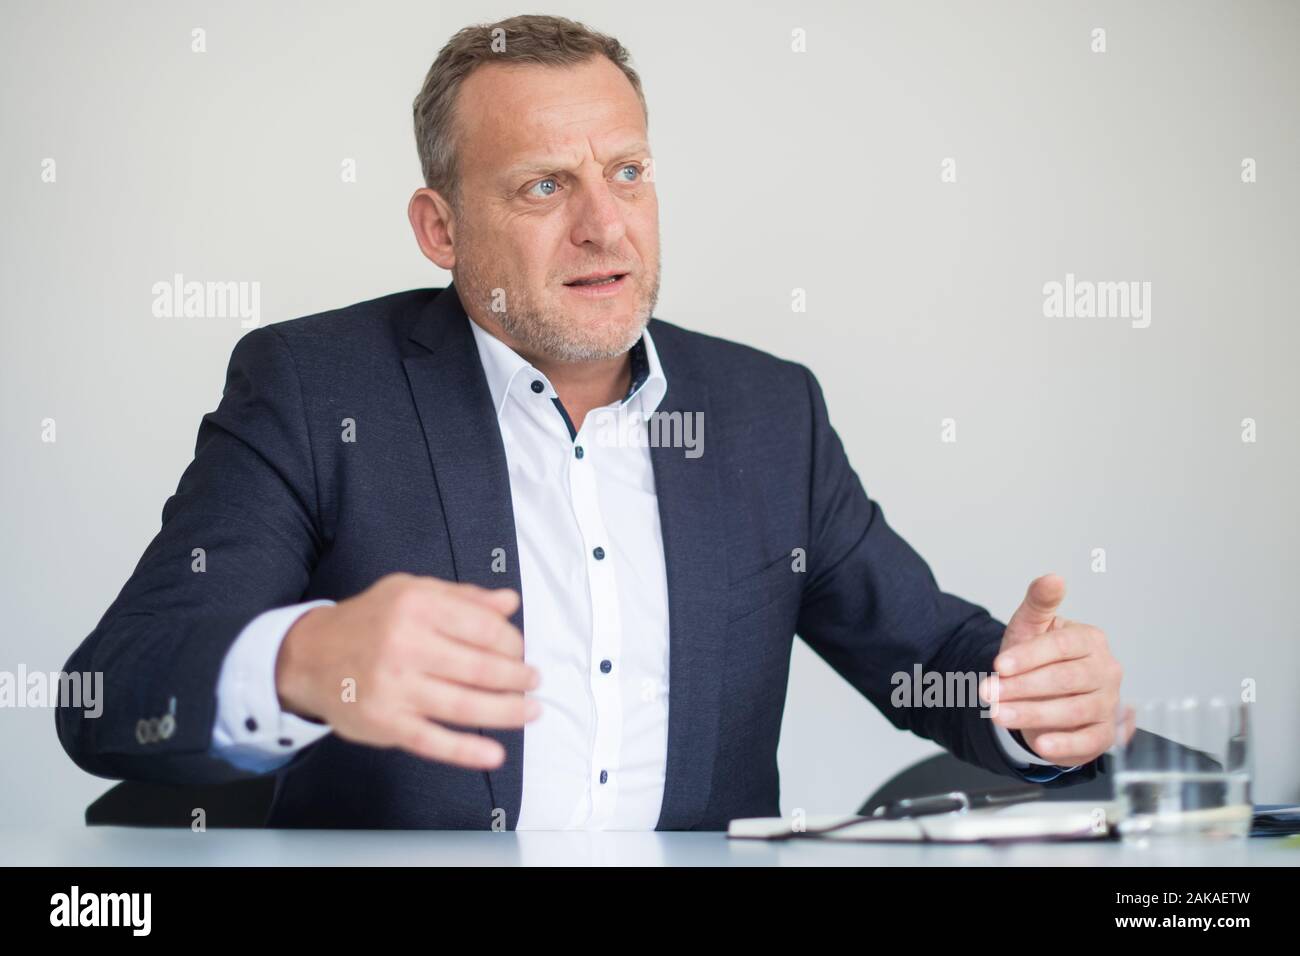 Stuttgart, Germany. 07th Jan, 2020. Roman Zitzelsberger, district manager of IG Metall Baden-Württemberg, will take part in a discussion with the Deutsche Presse-Agentur (dpa) Credit: Tom Weller/dpa/Alamy Live News Stock Photo